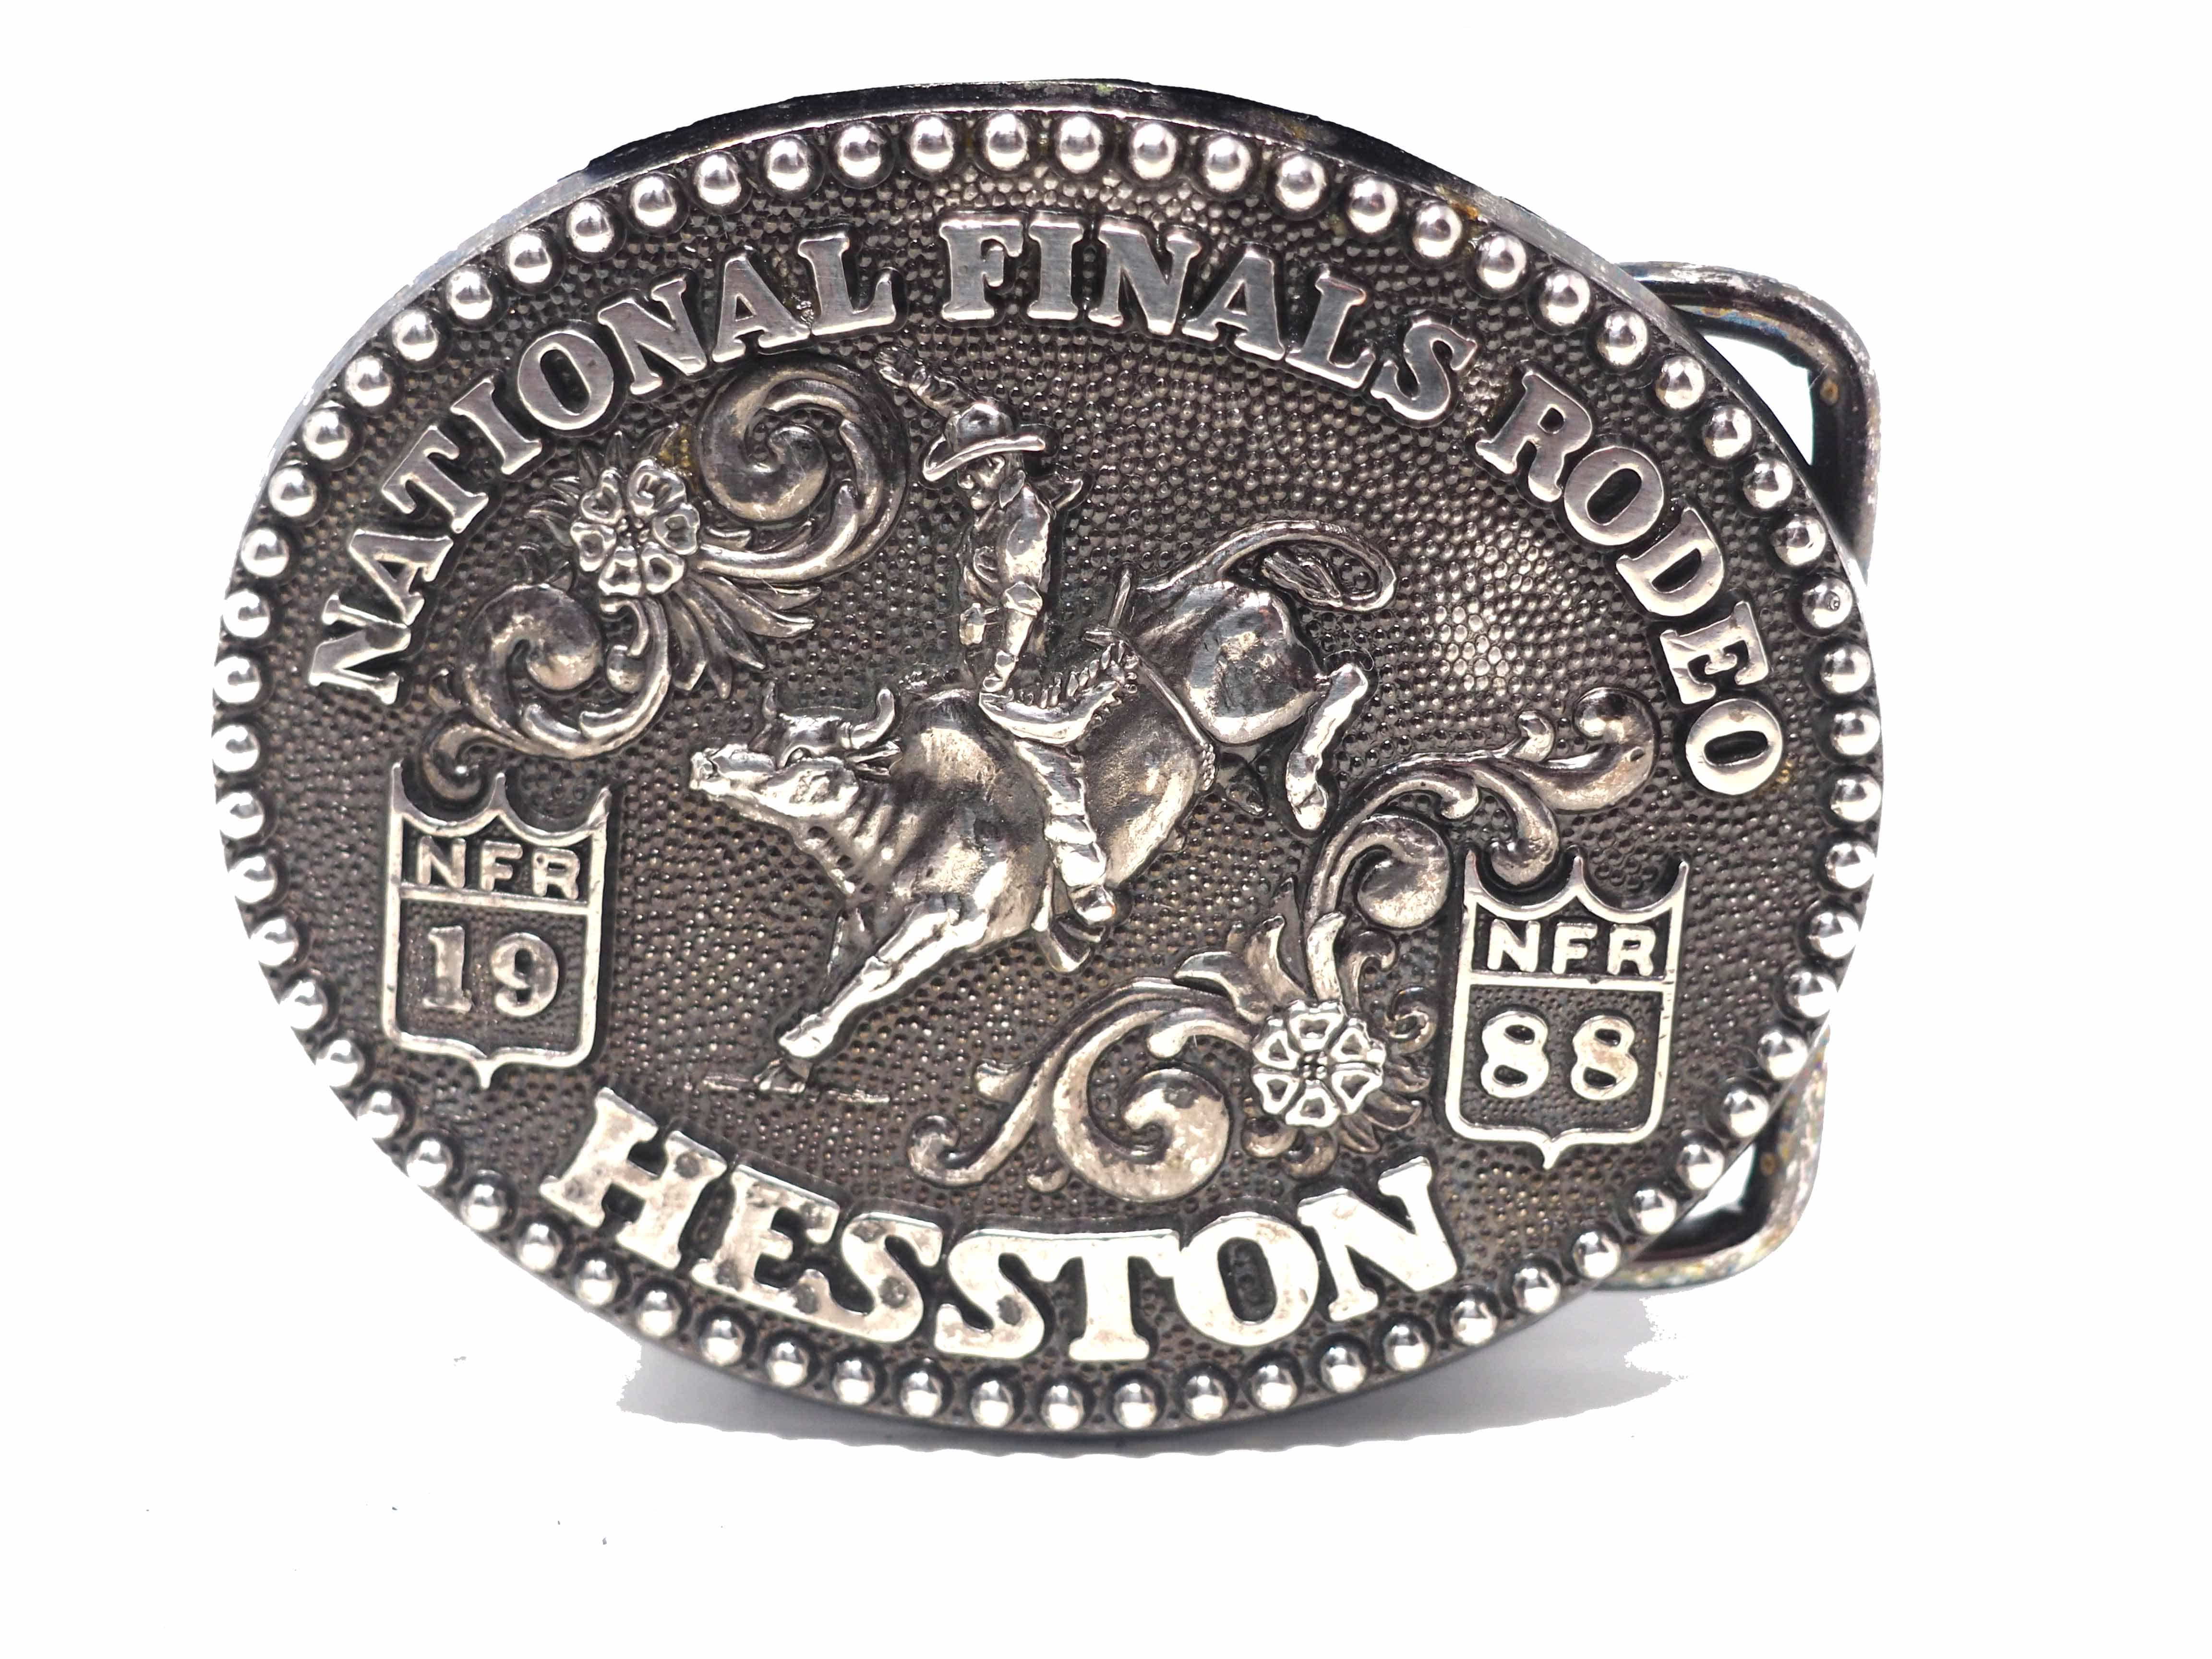 National Finals Rodeo 1988 Hesston 6th Edition Anniversary Series Belt